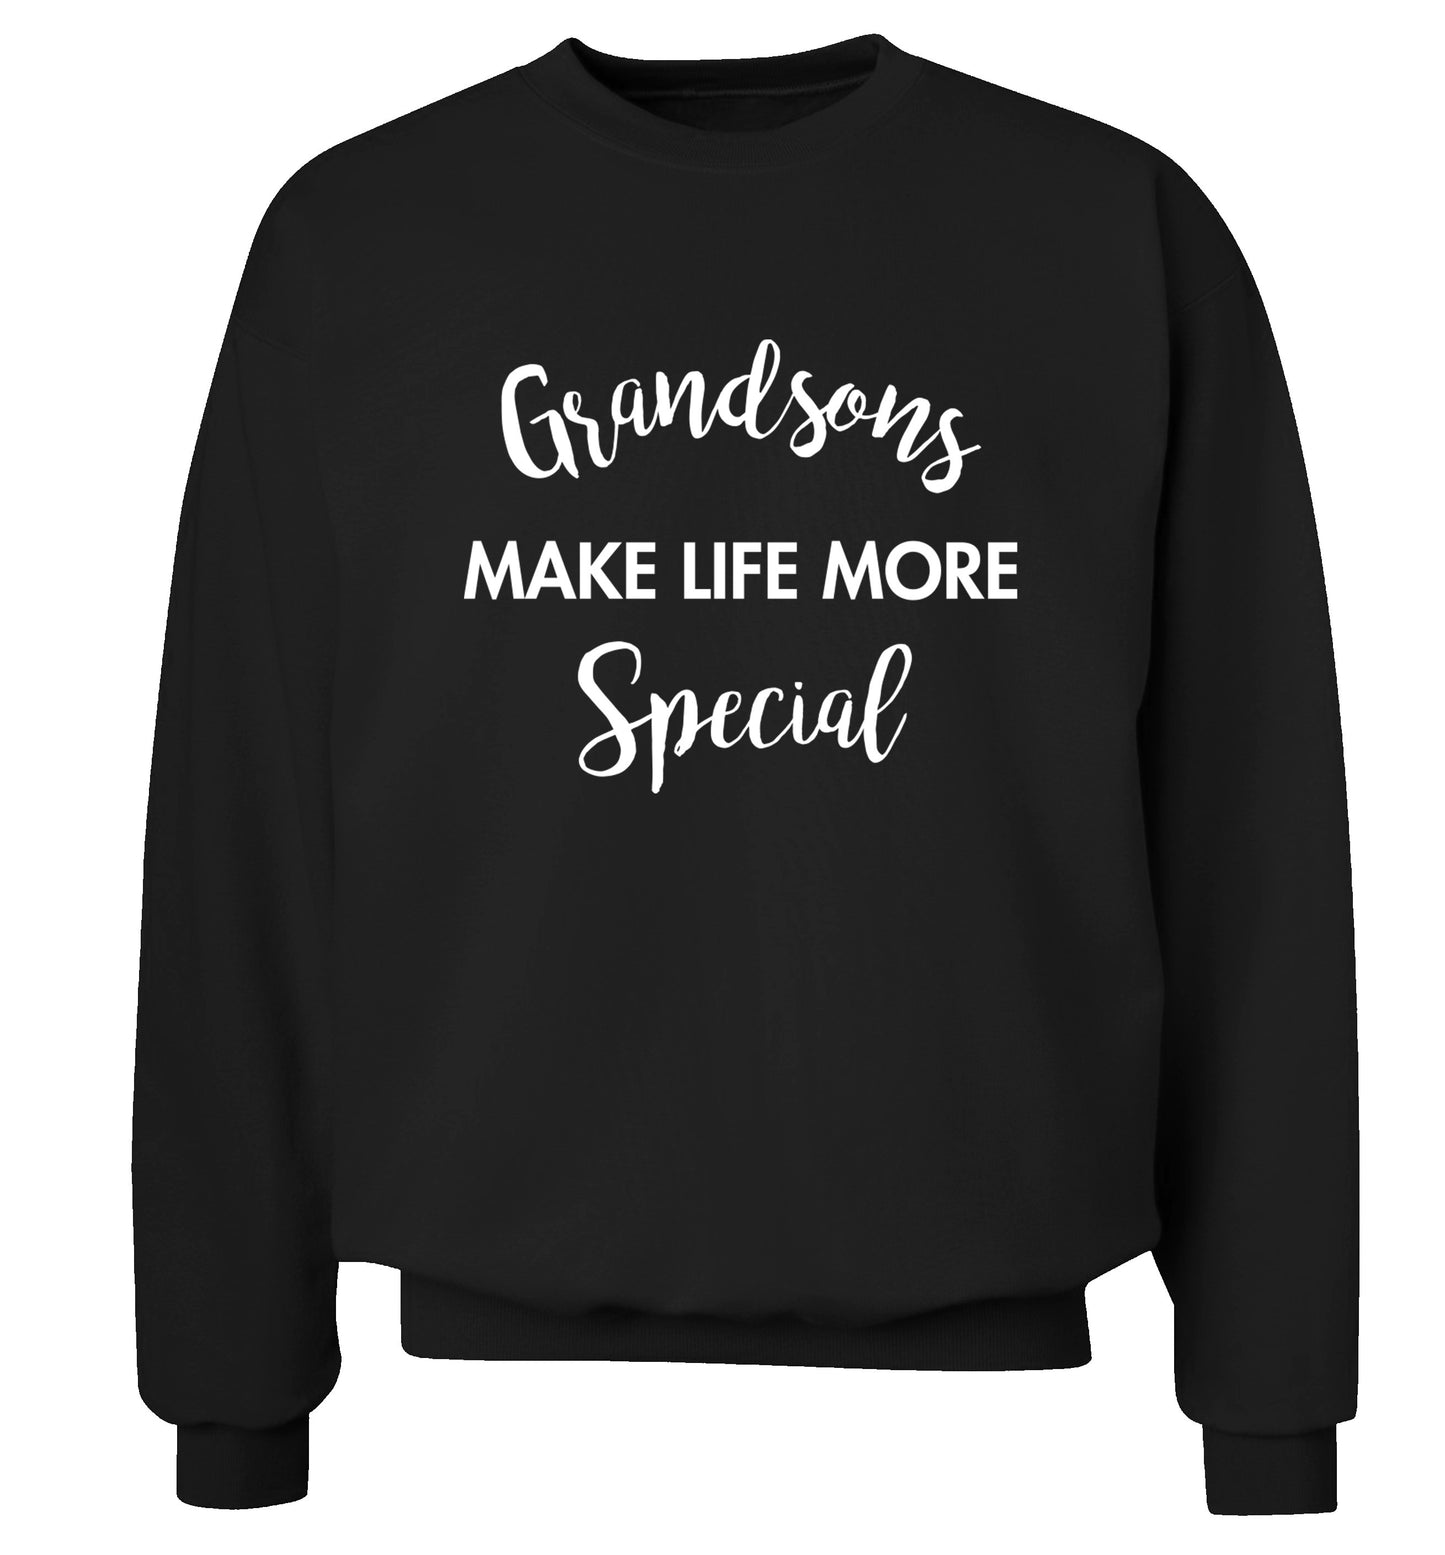 Grandsons make life more special Adult's unisex black Sweater 2XL